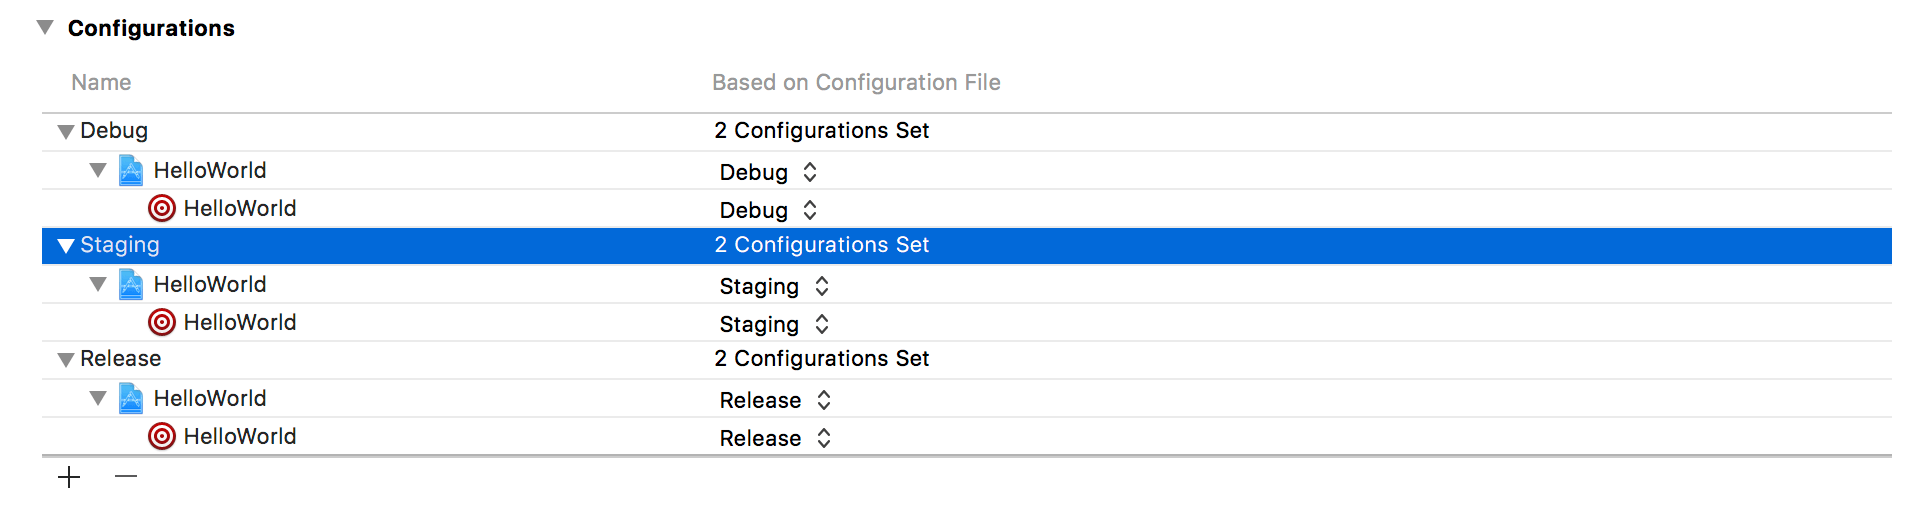 staging-configuration-file-2